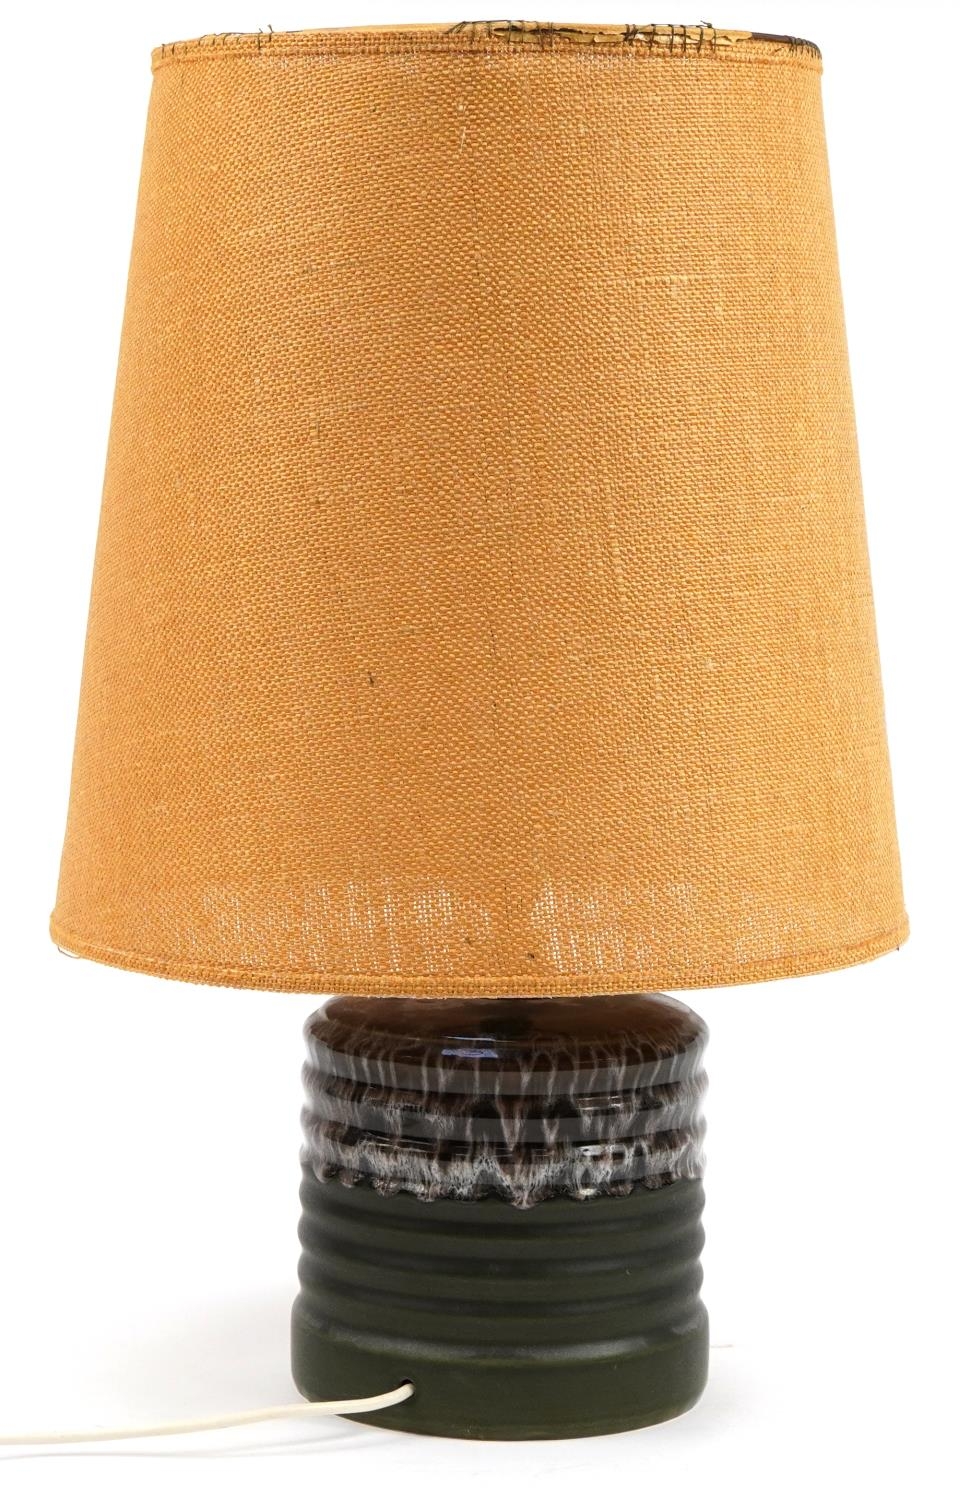 West Germany pottery cylindrical table lamp with shade, 62cm high - Image 2 of 3